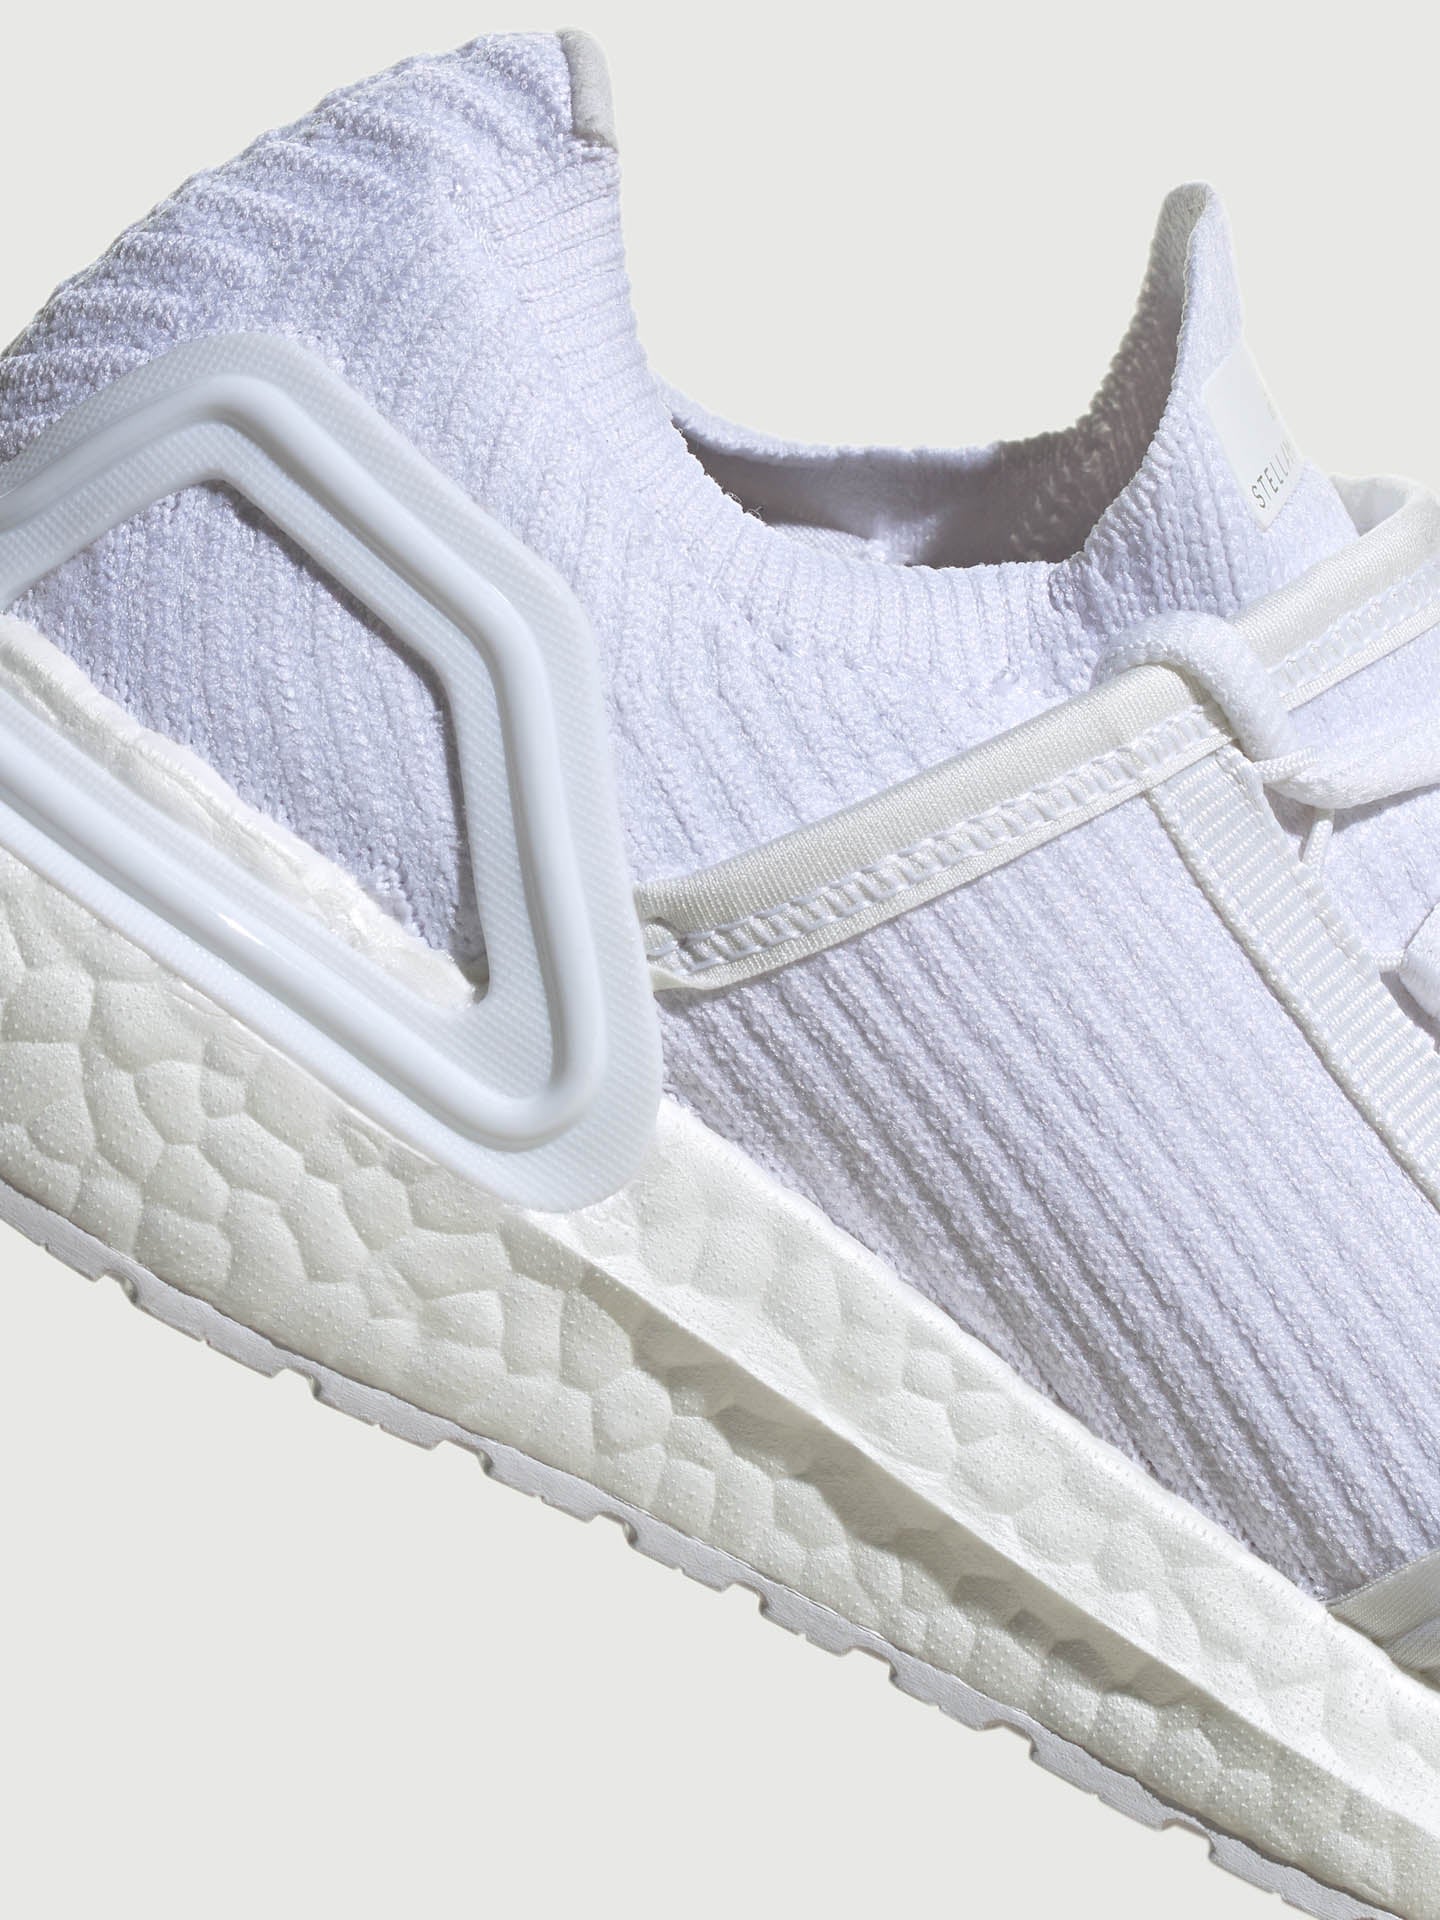 adidas by Stella McCartney UltraBoost Trainer Review